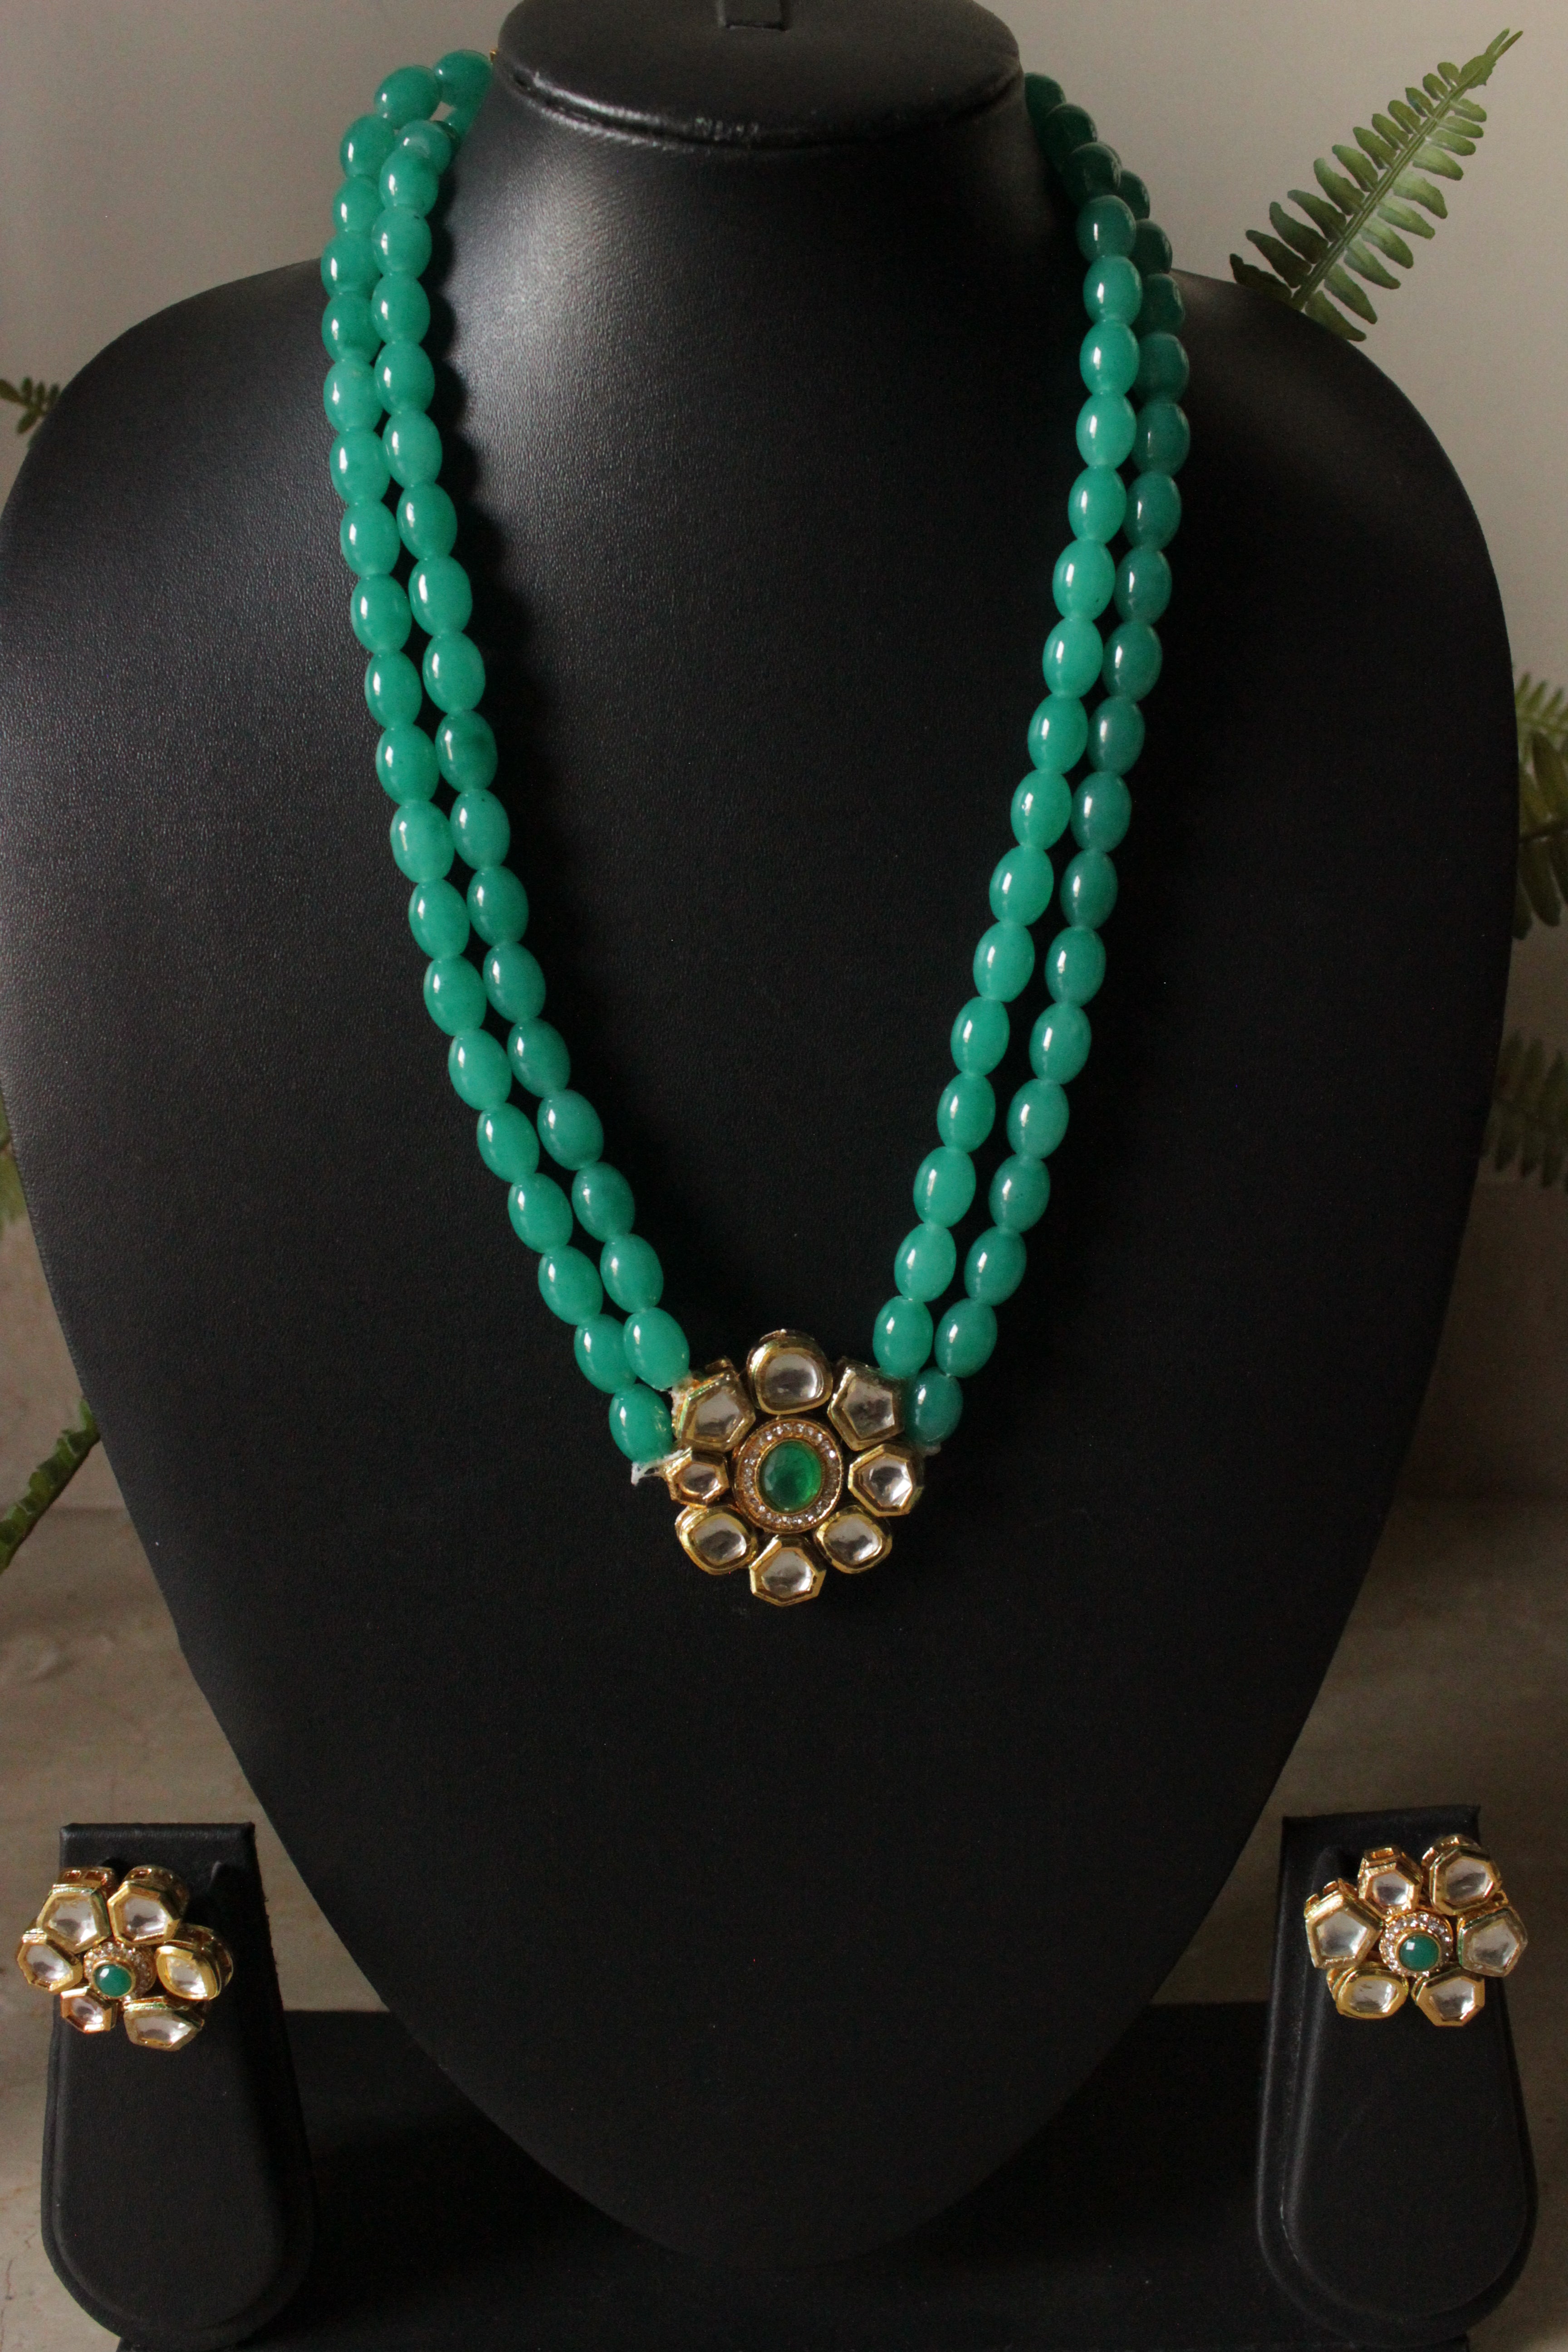 Turquoise Glass Beads and Kundan Stones 2 Layer Adjustable Length Necklace Set with Flower Stud Earrings